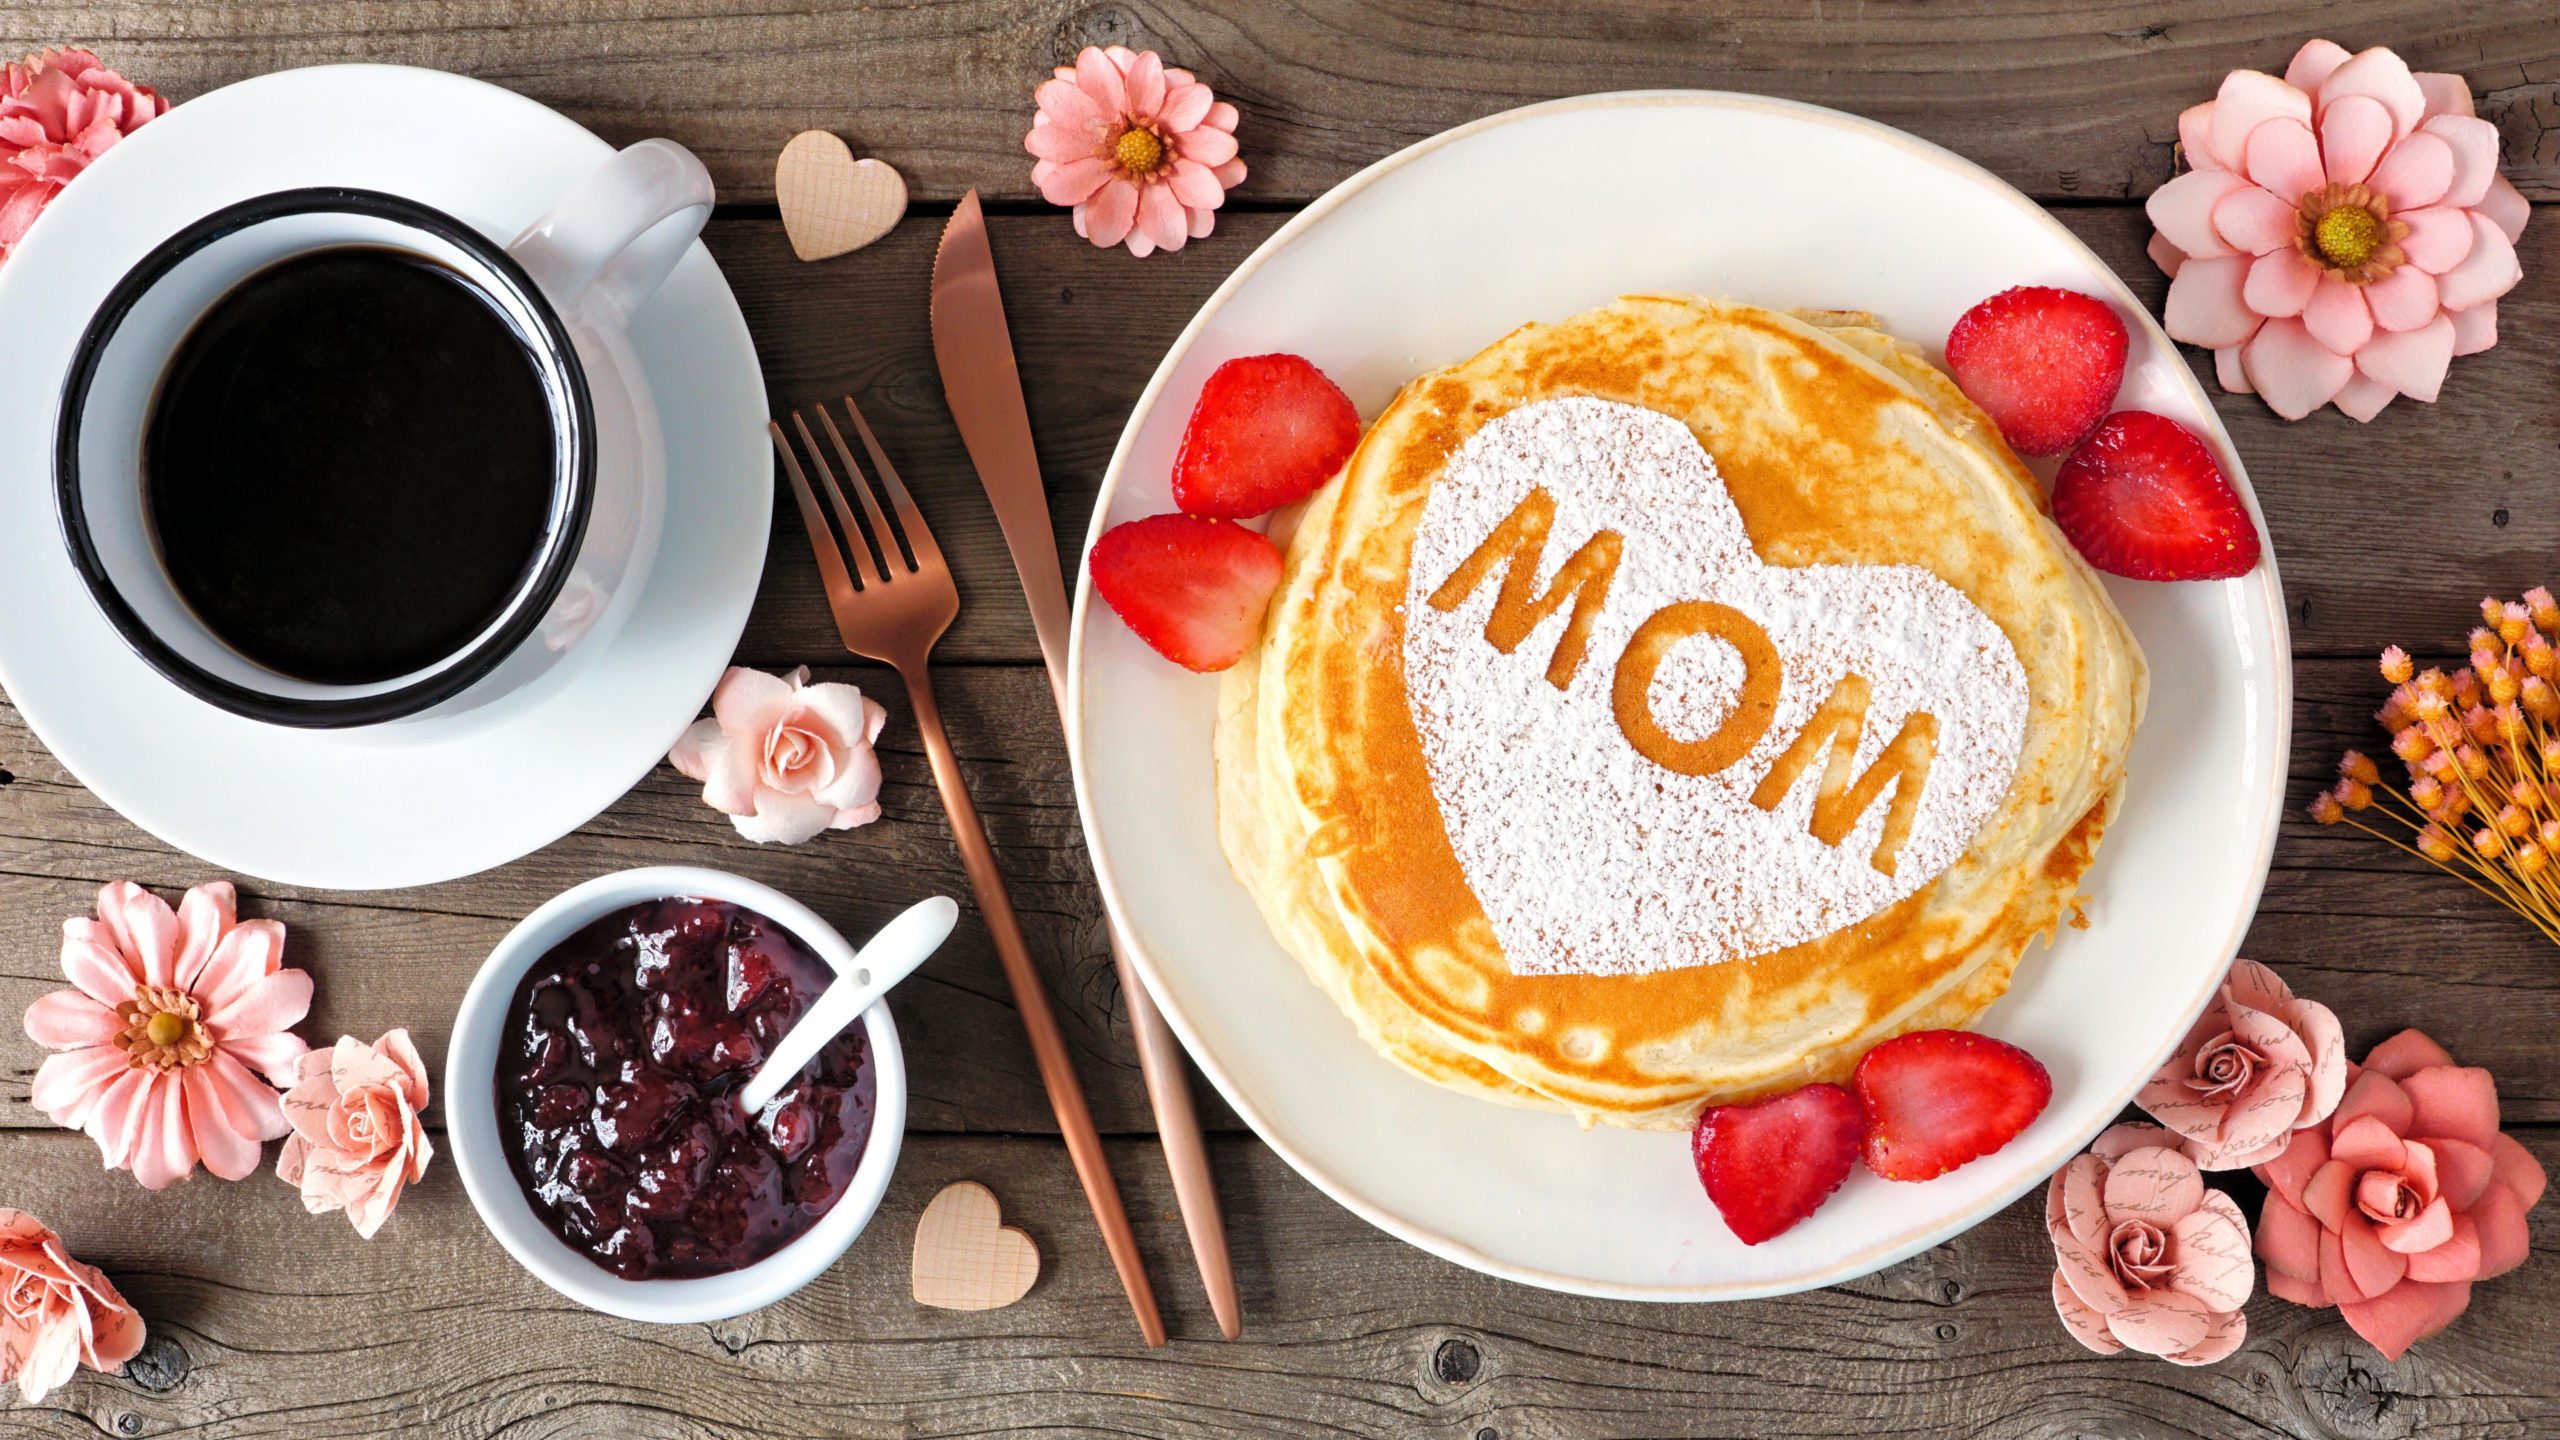 Your Mother’s Day Breakfast Isn’t Special If It’s for Everyone